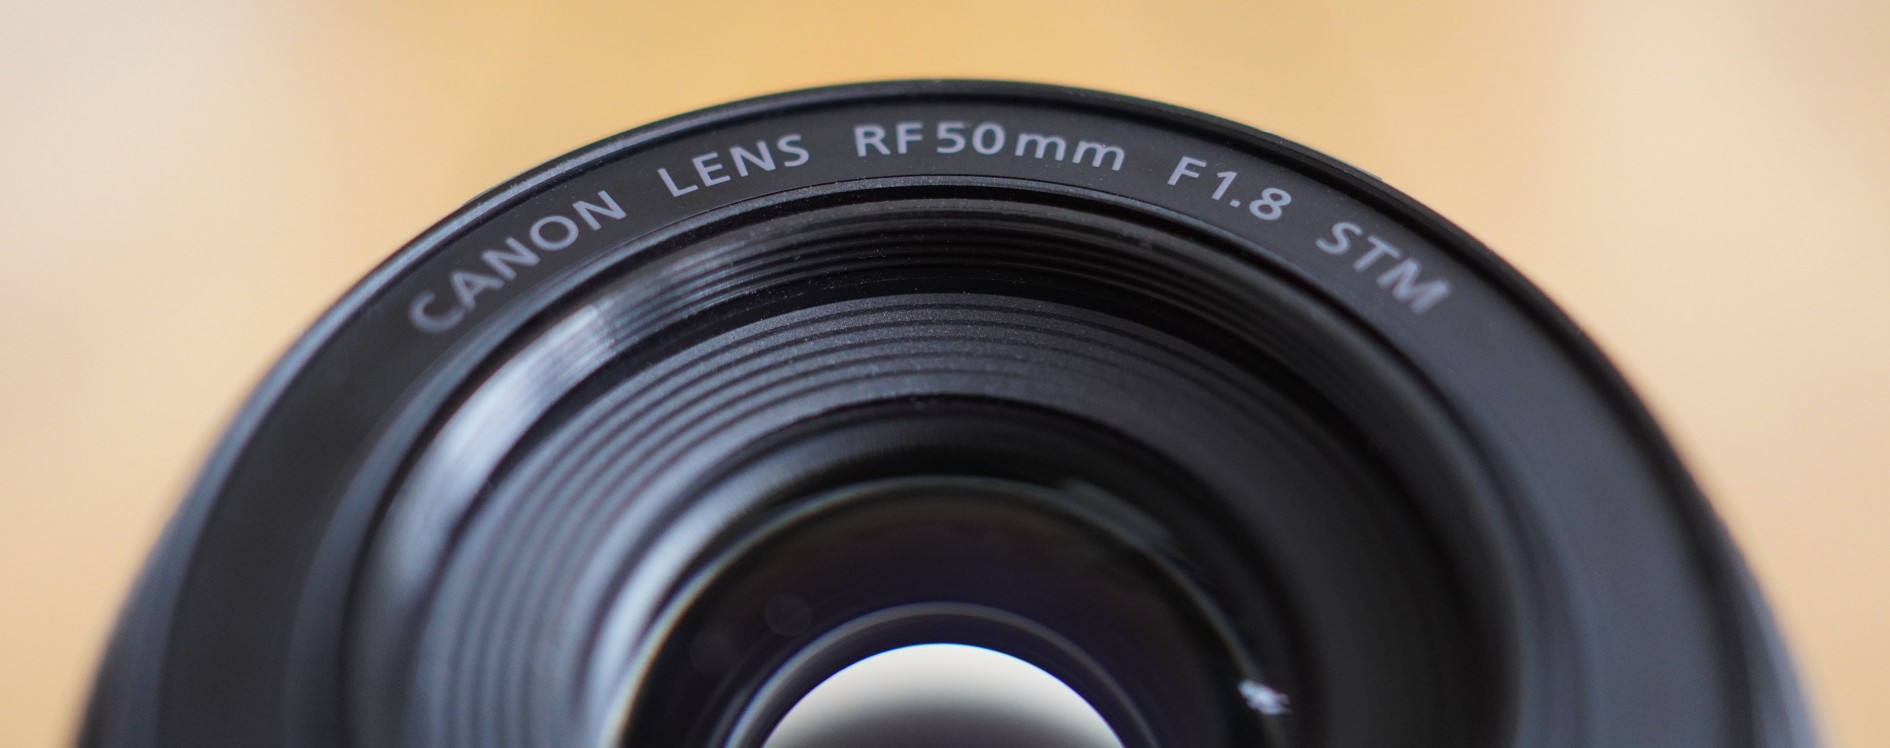 Canon RF 50mm f1.8 STM review | Cameralabs